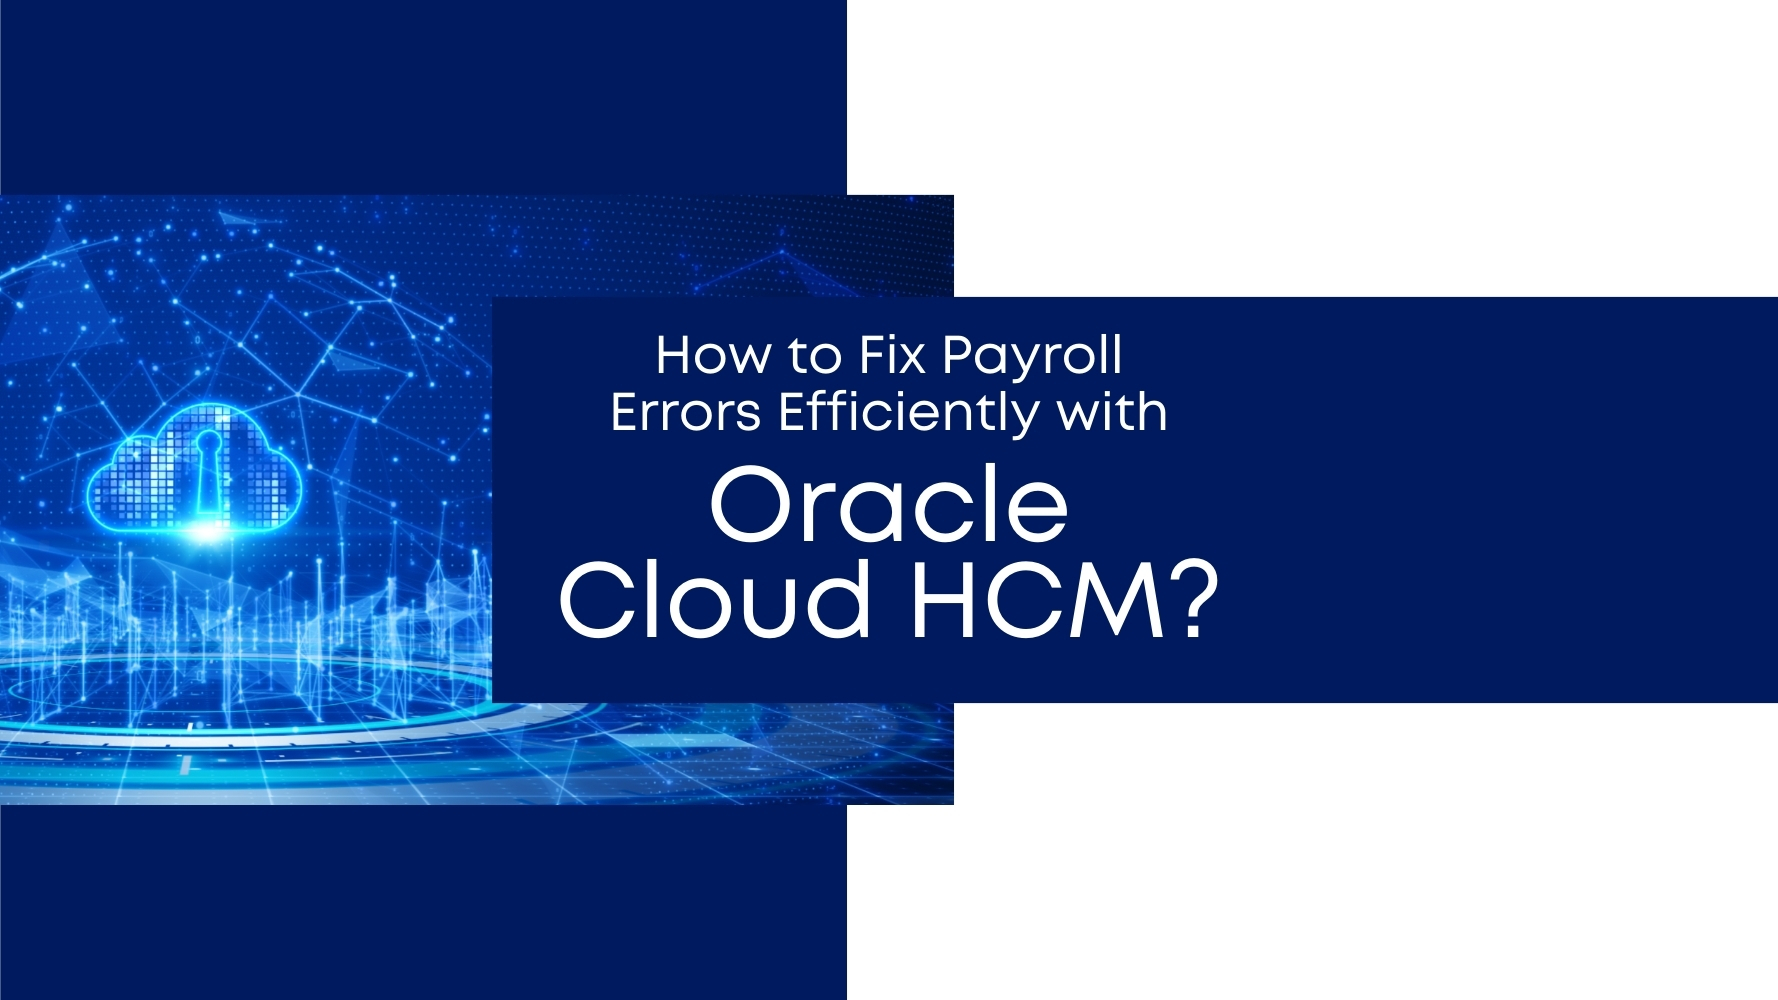 How to Fix Payroll Errors Efficiently with Oracle Cloud HCM_.jpg